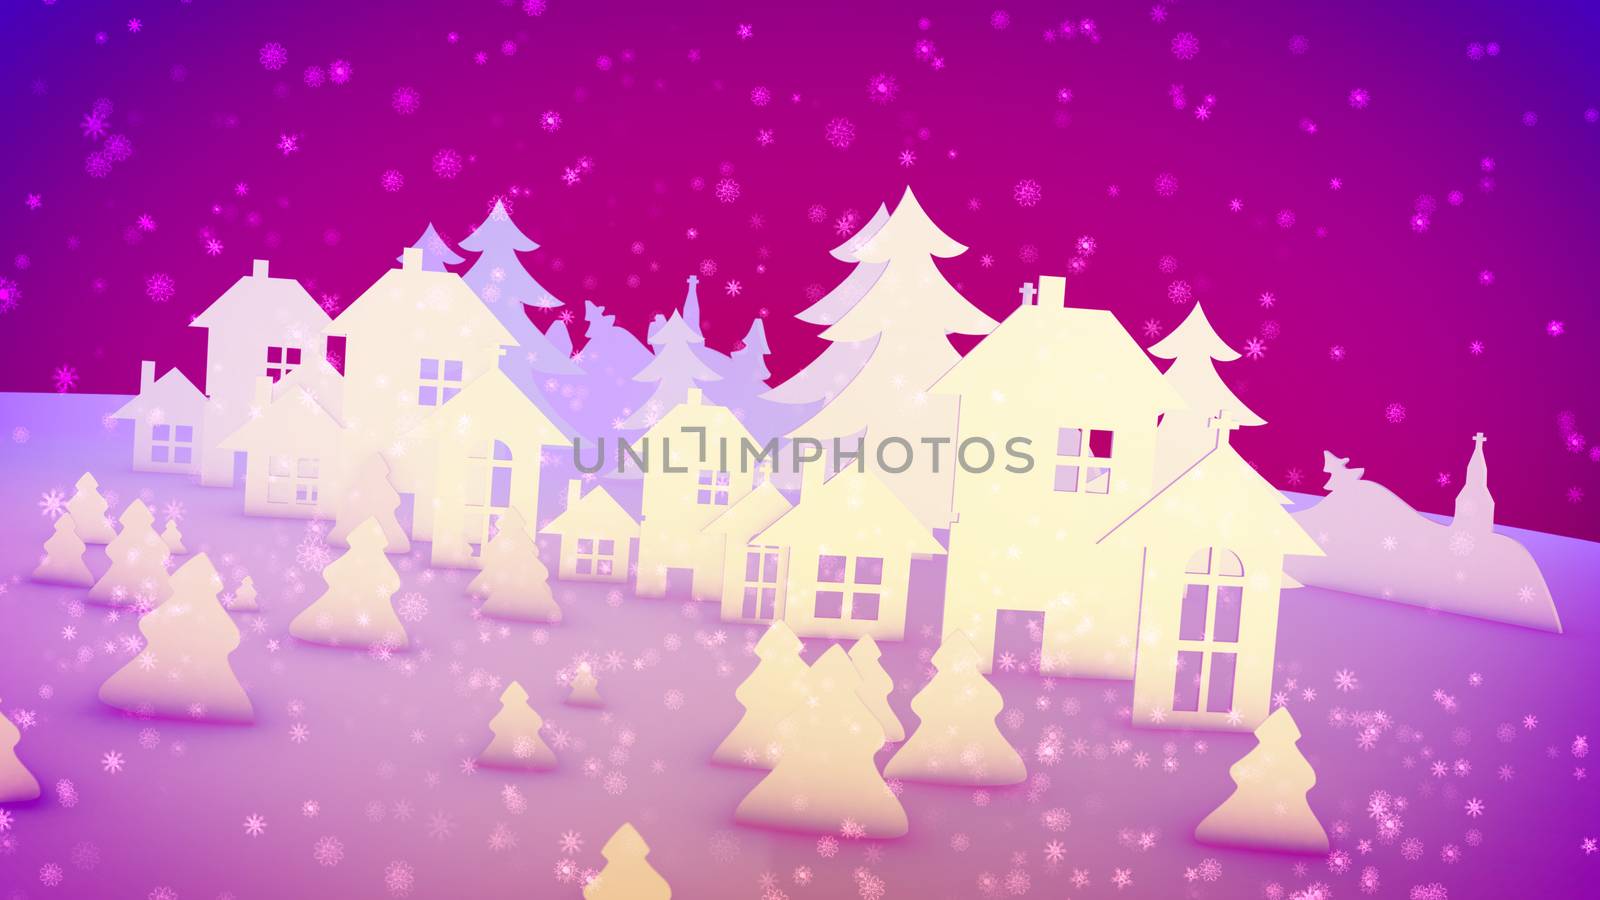 Celebratory 3d illustration of Christmas paper houses with windows and chimneys, a church and pine trees under falling sparkling snowflakes in the pink background